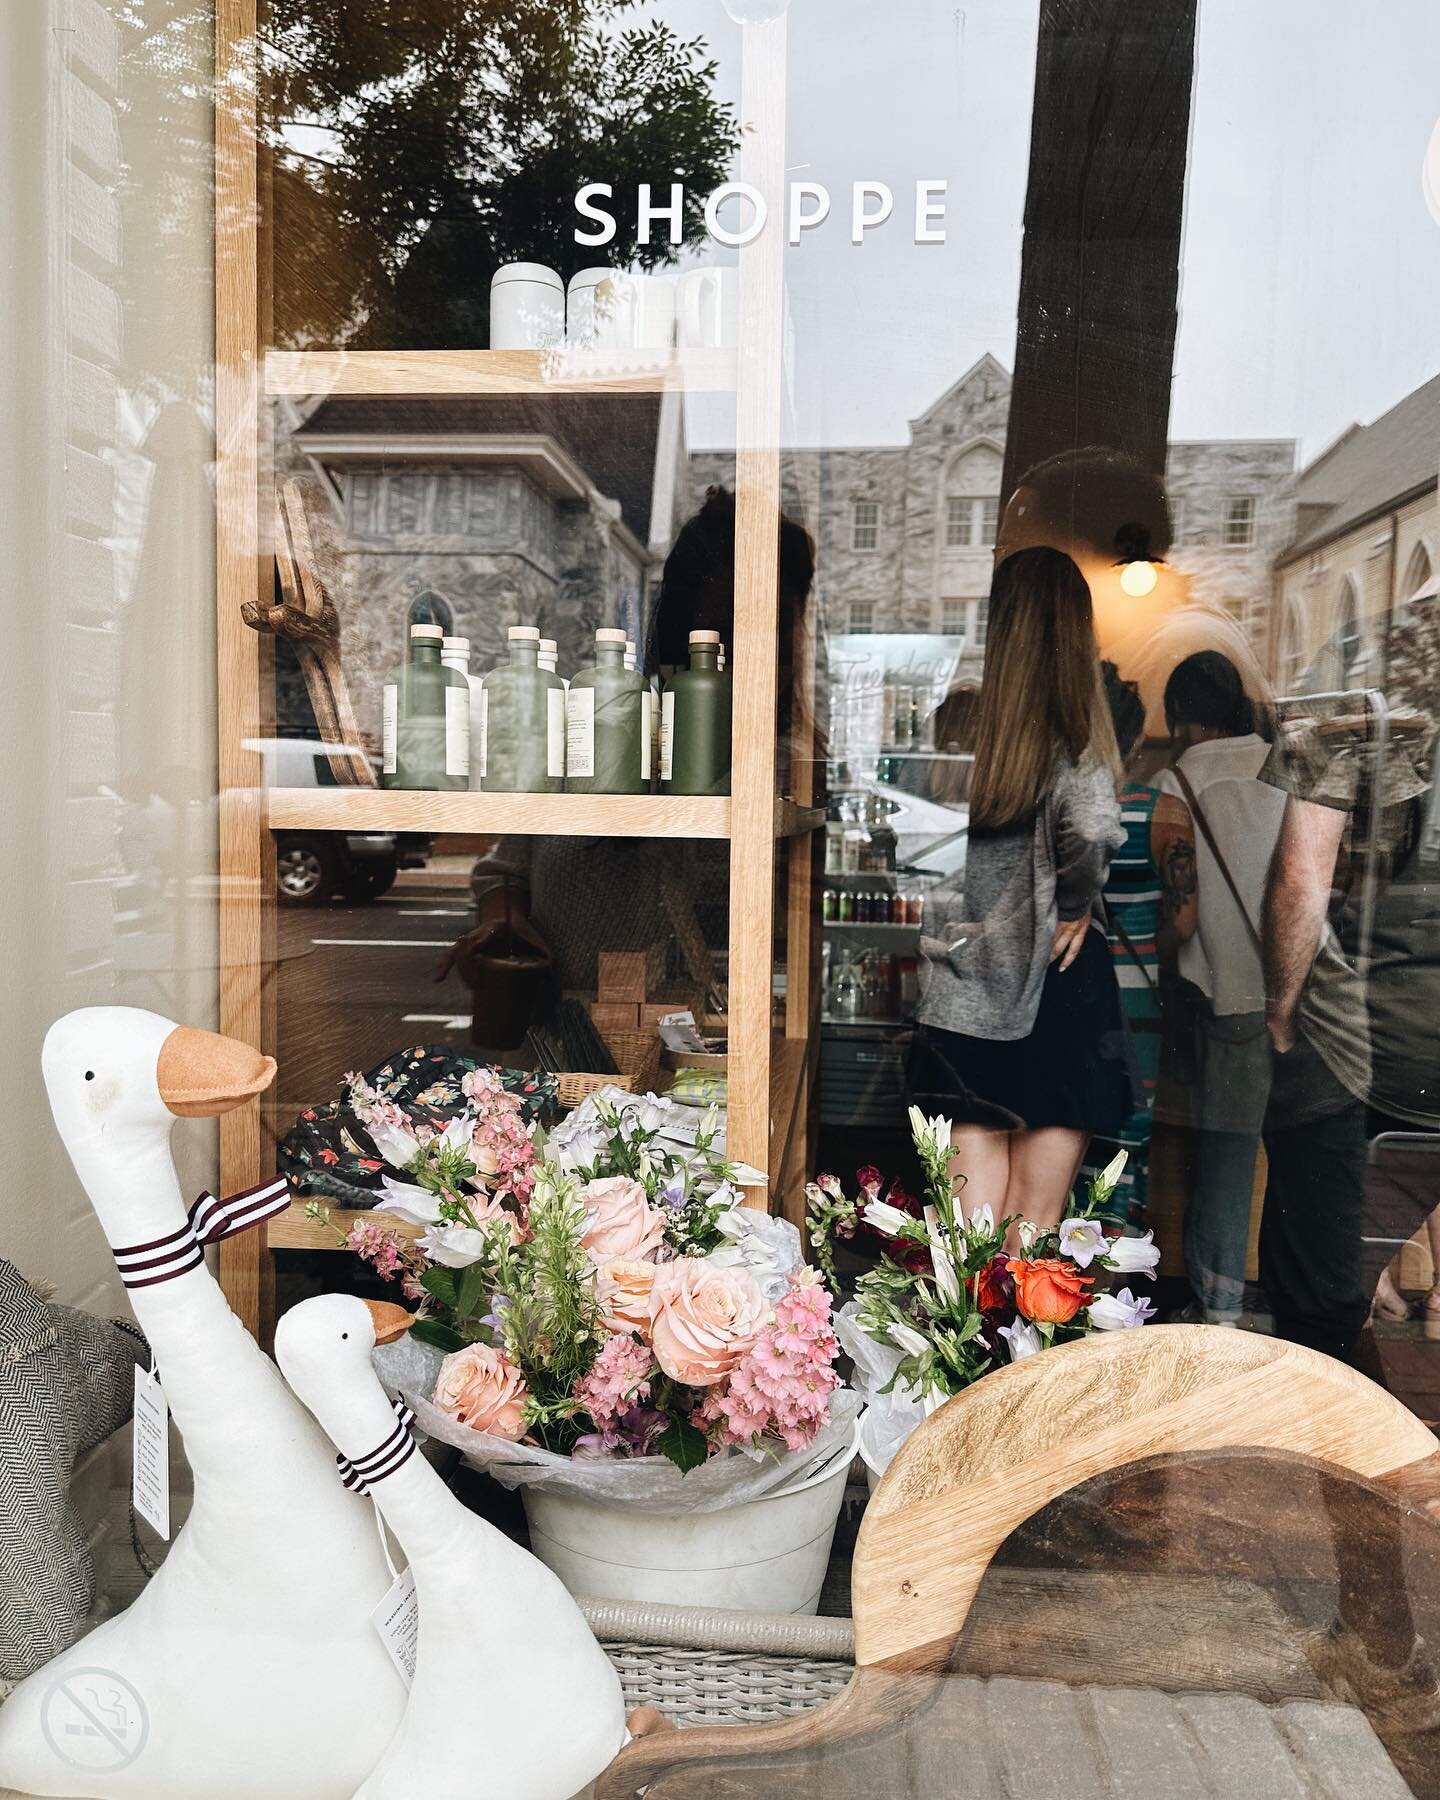 mother&rsquo;s day at tuesday is special &mdash; 
shoppe is bustling today!! we&rsquo;ve got some flowers left, biscuit cinni tins for pick up to bake, and lots of diapers, wipes + formula collected so far + @shopbornbaby is here with things for litt